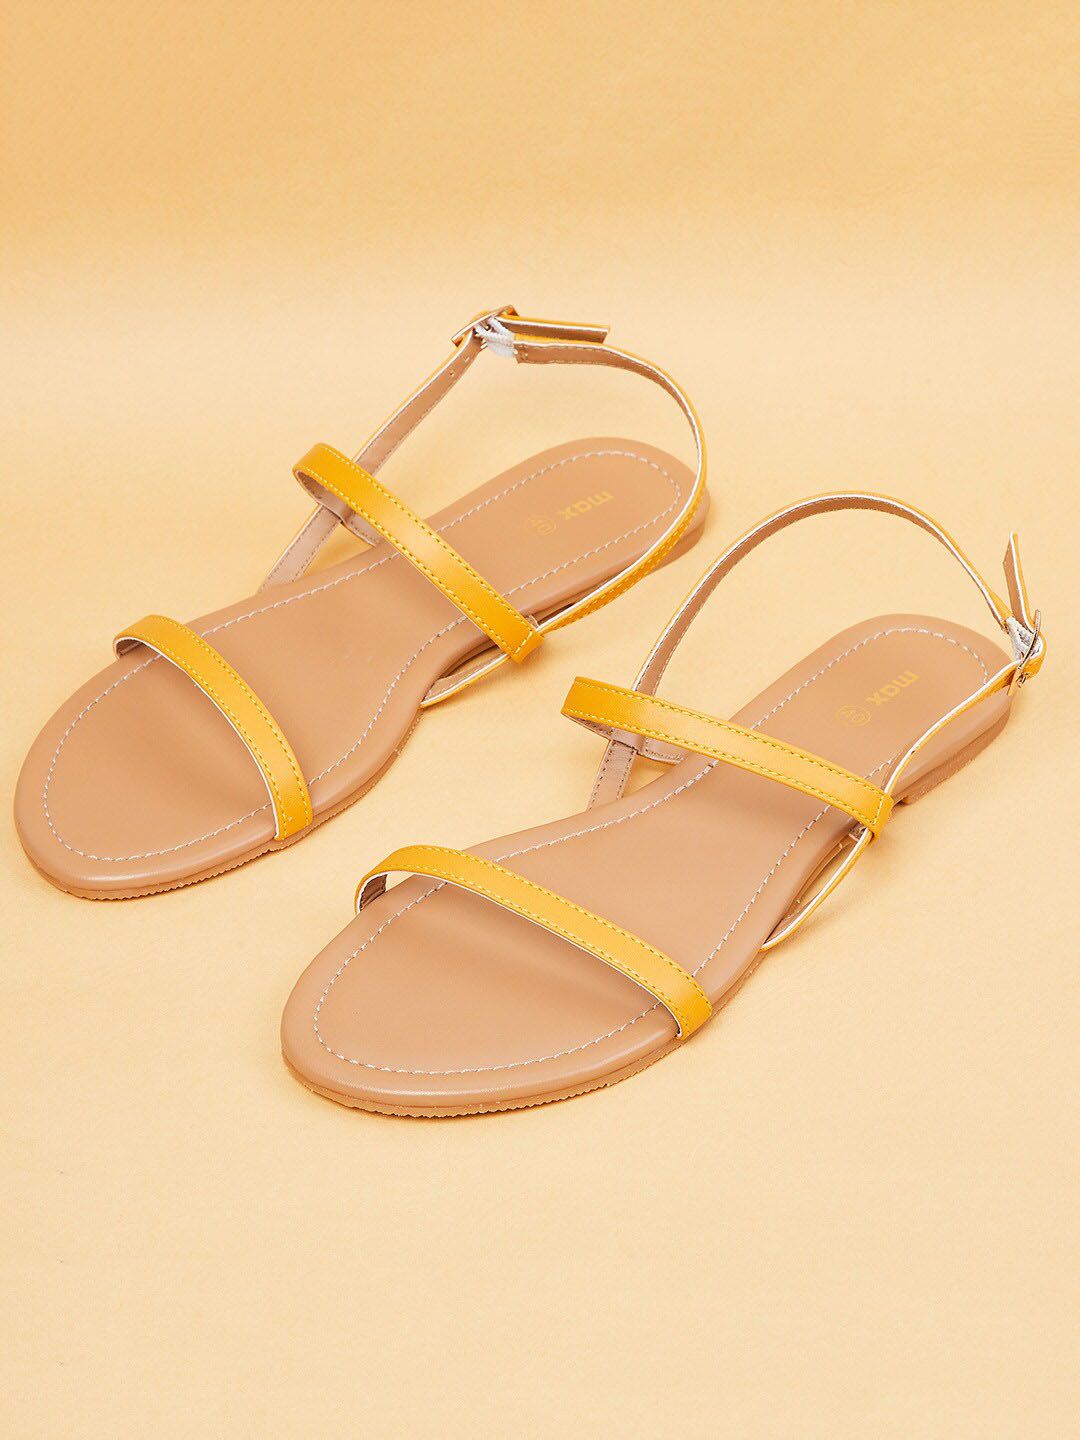 max Women Mustard Yellow Open Toe Flats with Bows Price in India